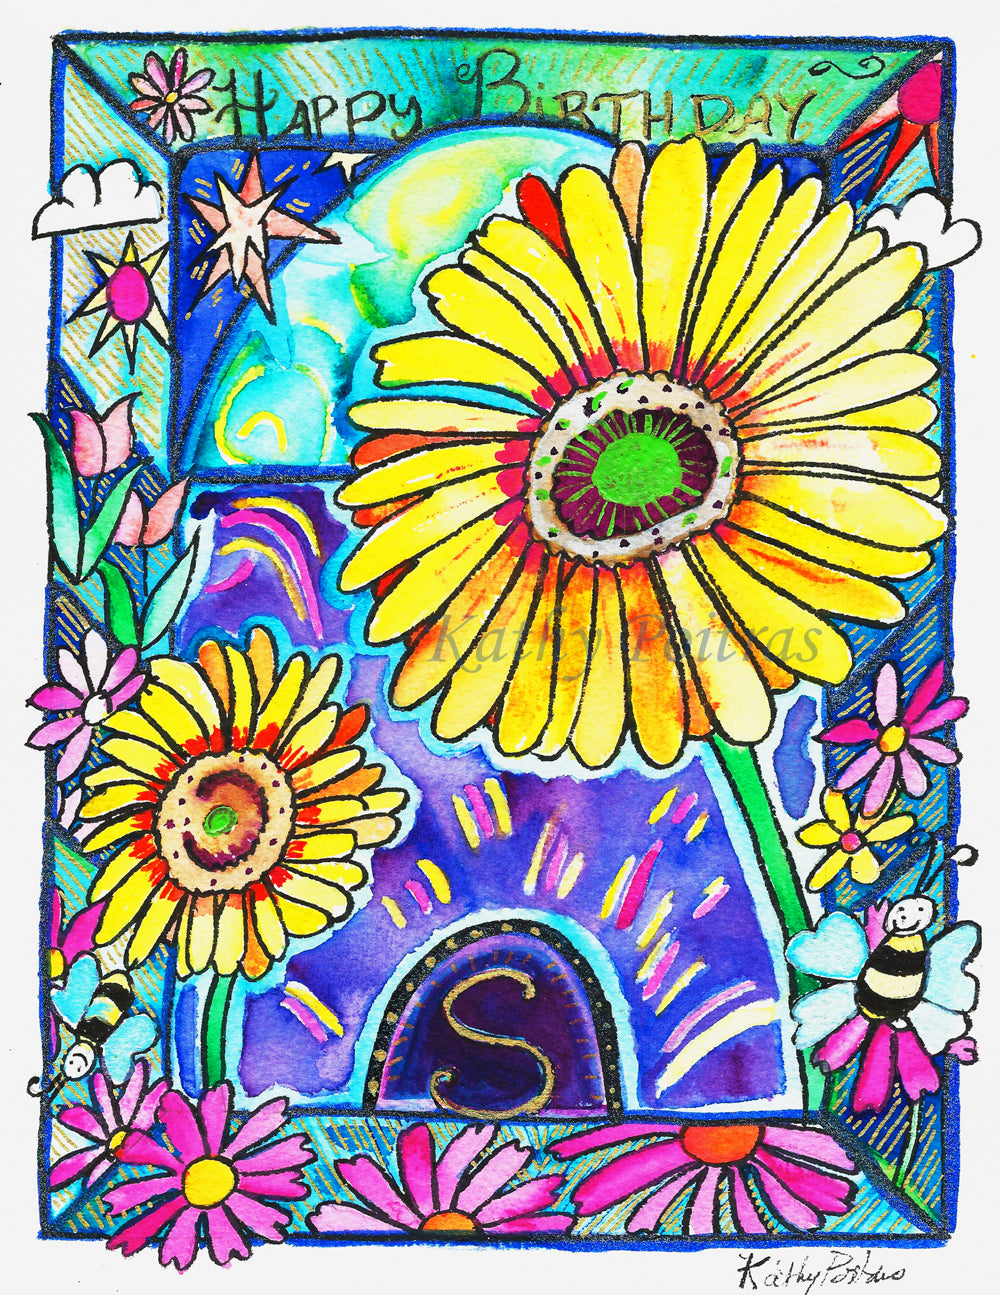 Personalized flower of the month April, Happy Birthday Card. Daisies and the letter S.  A cheerful whimsical cathedral with celebratory color bursts, featuring the letter S, and daisies.  Surrounded by a border with naïve images expressing life.   Happy Birthday is written on the top. 